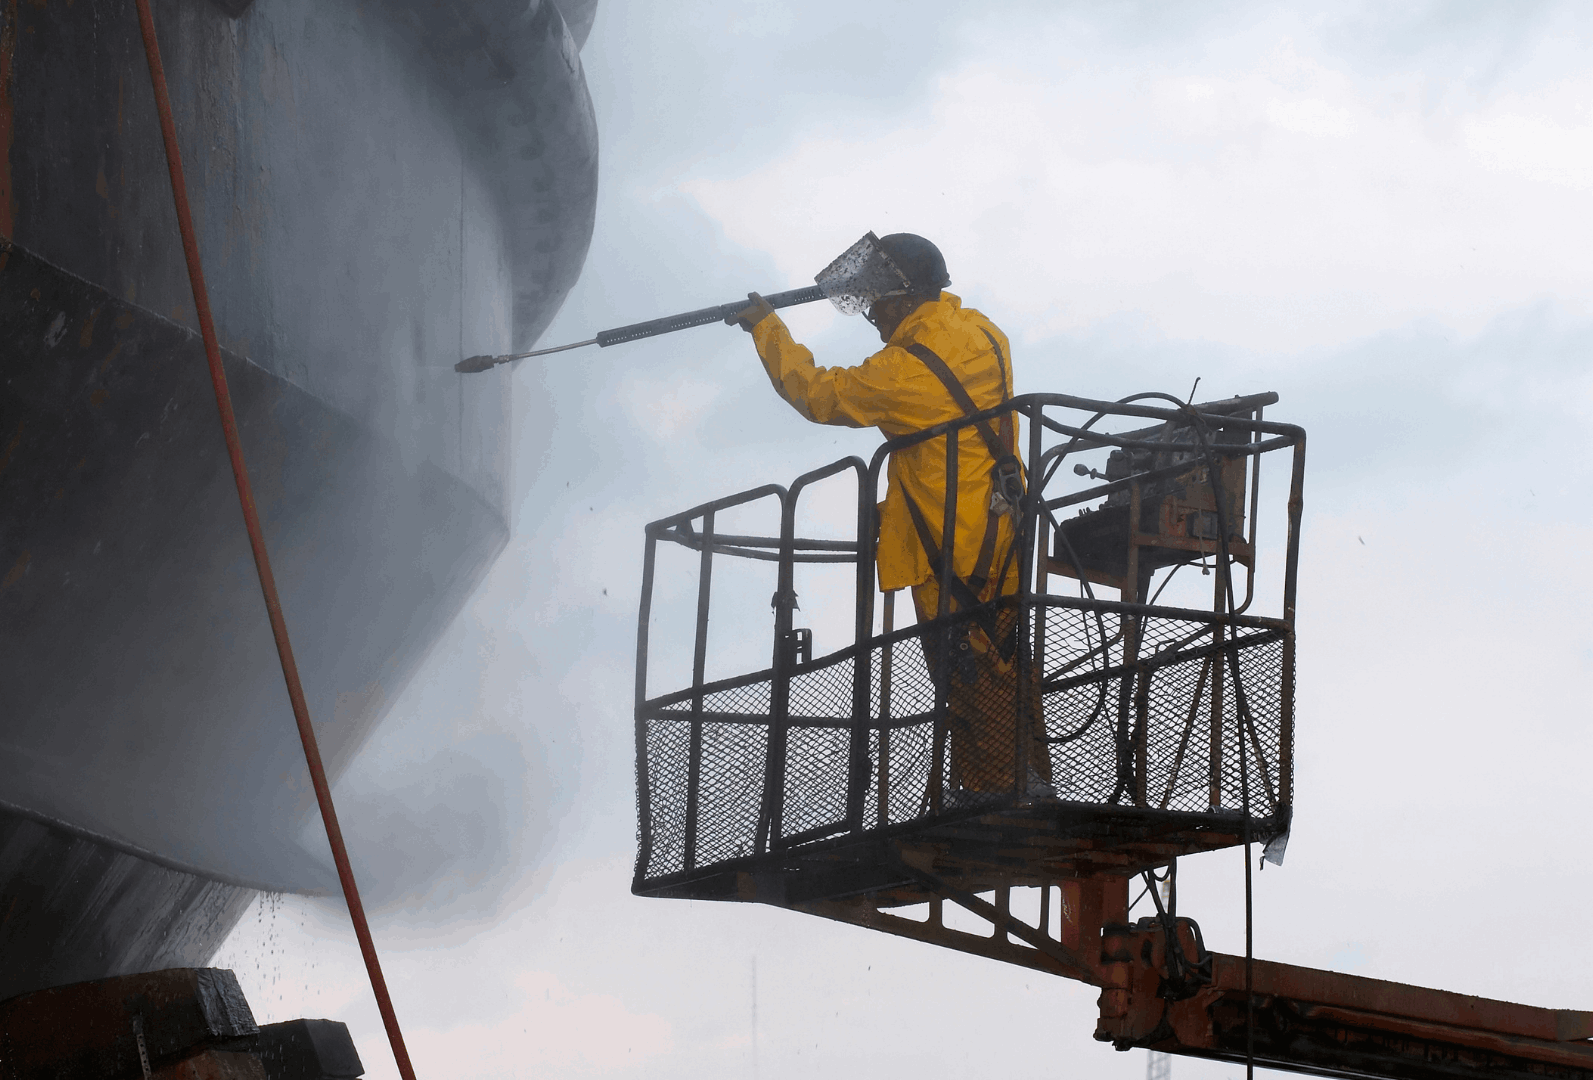 Man standing on platform cleaning silo with pressure washing equipment